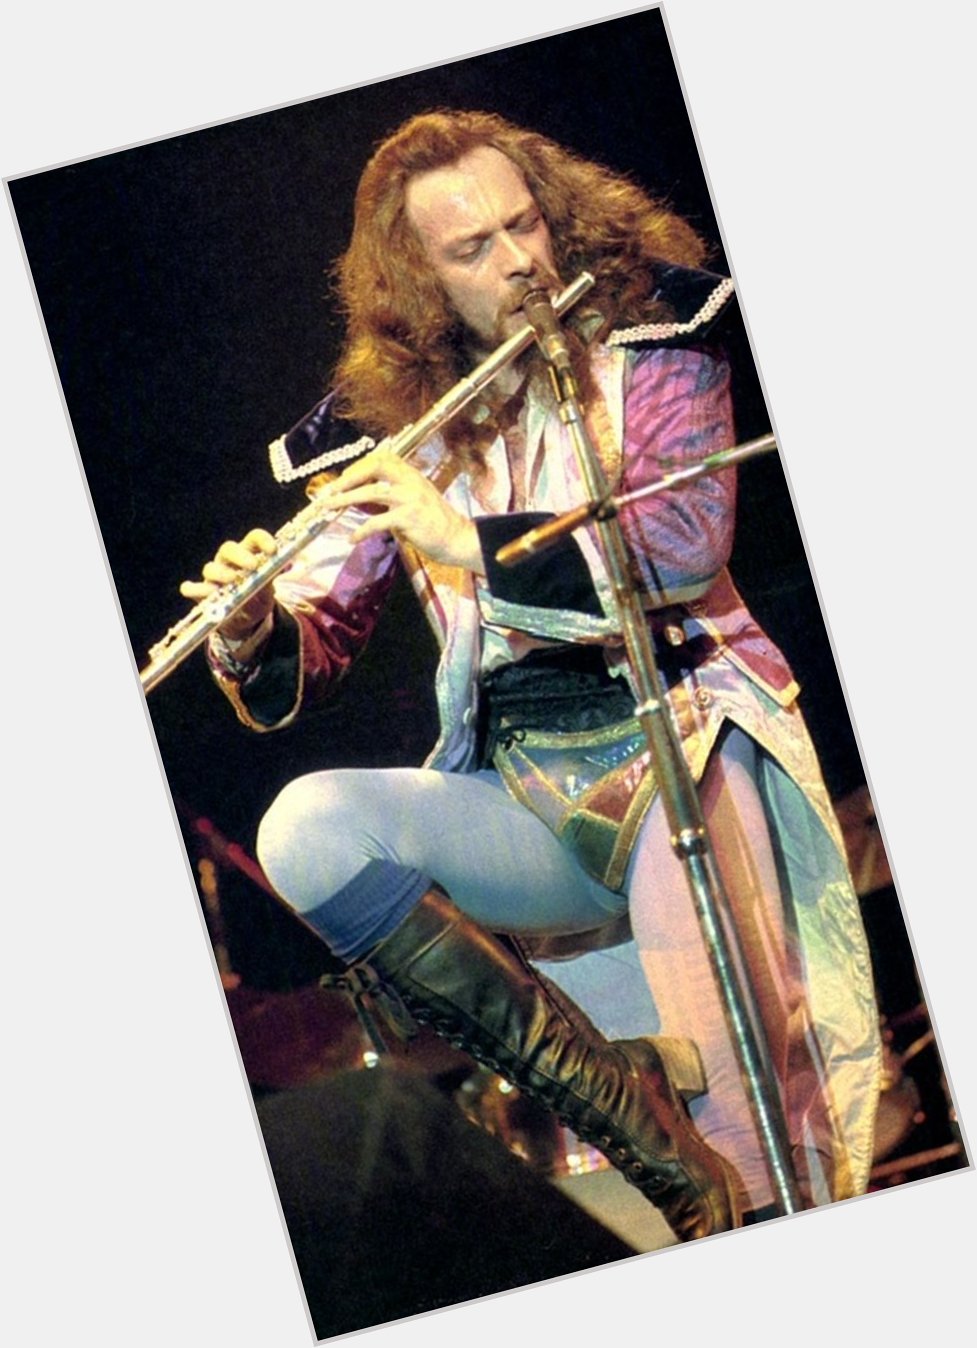 Happy Birthday Ian Anderson! Wherever you are... 